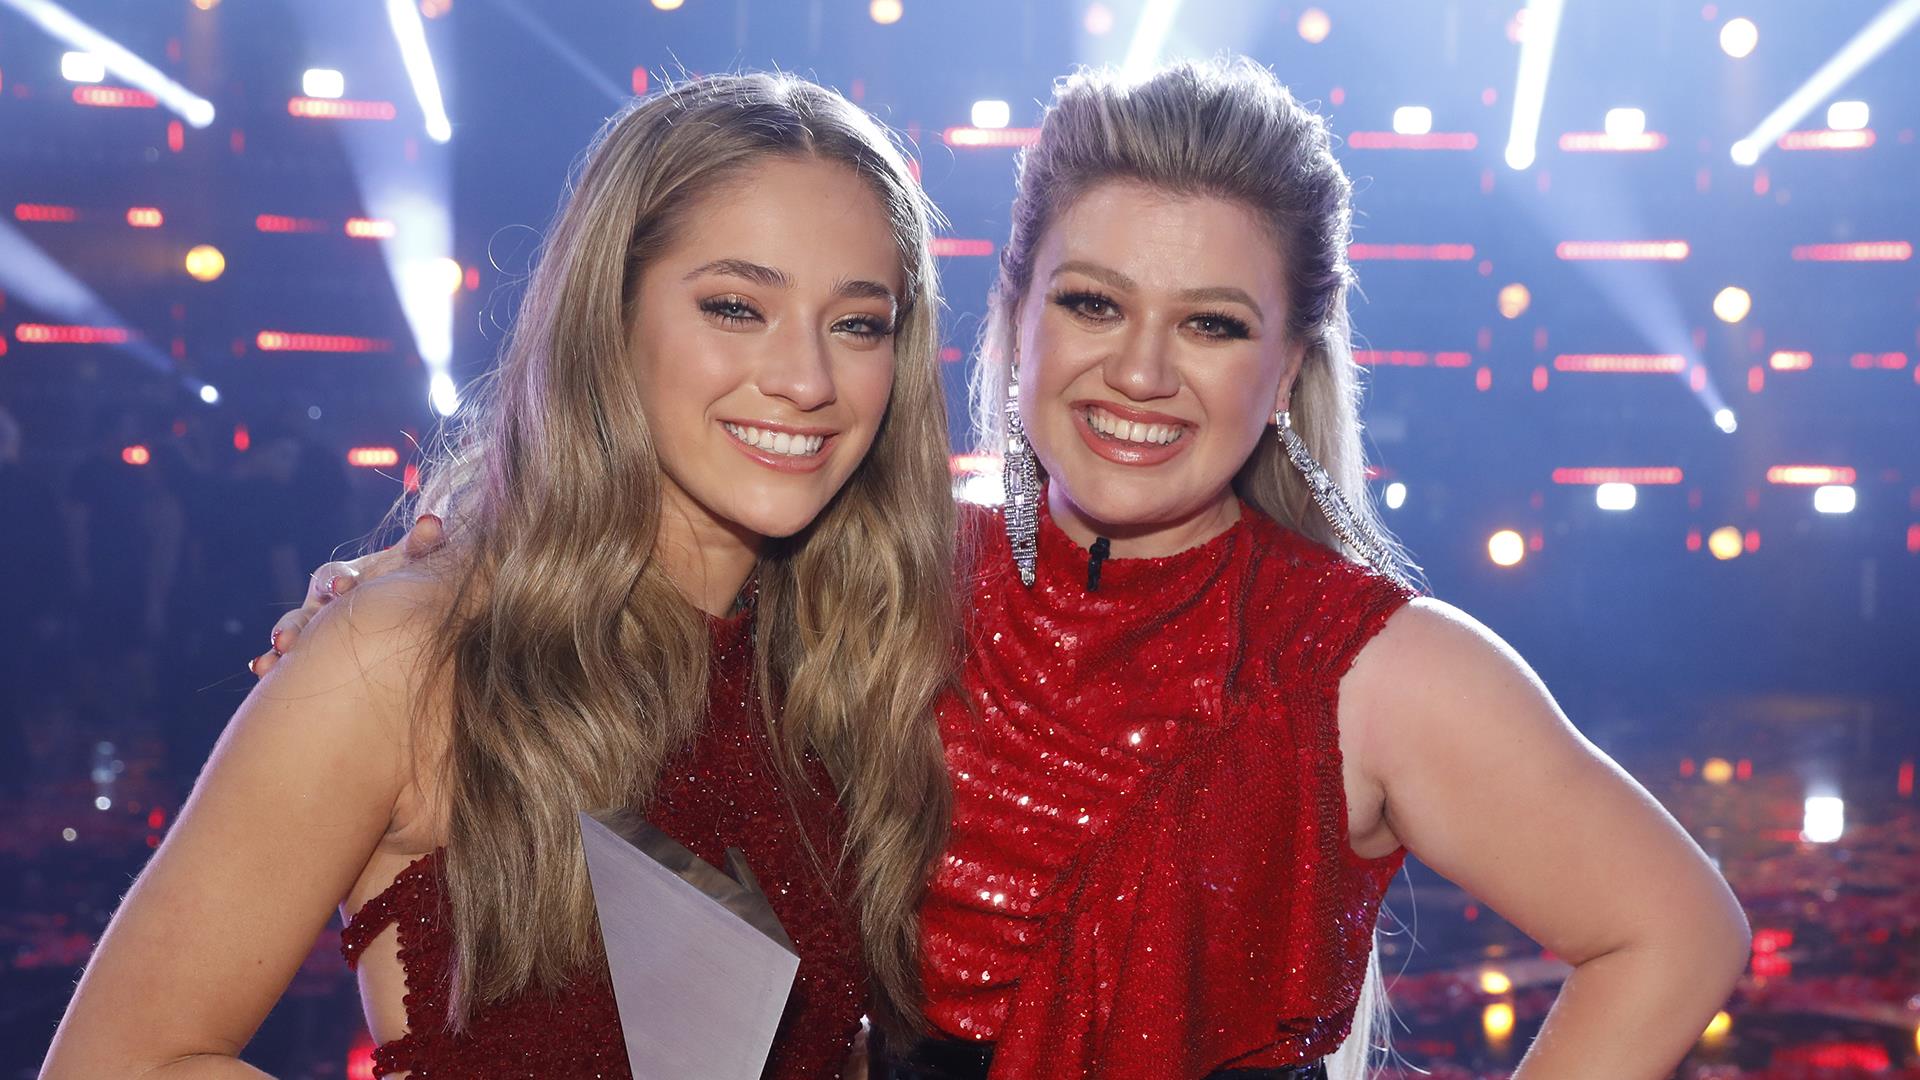 15-year-old Brynn Cartelli wins on 'The Voice'